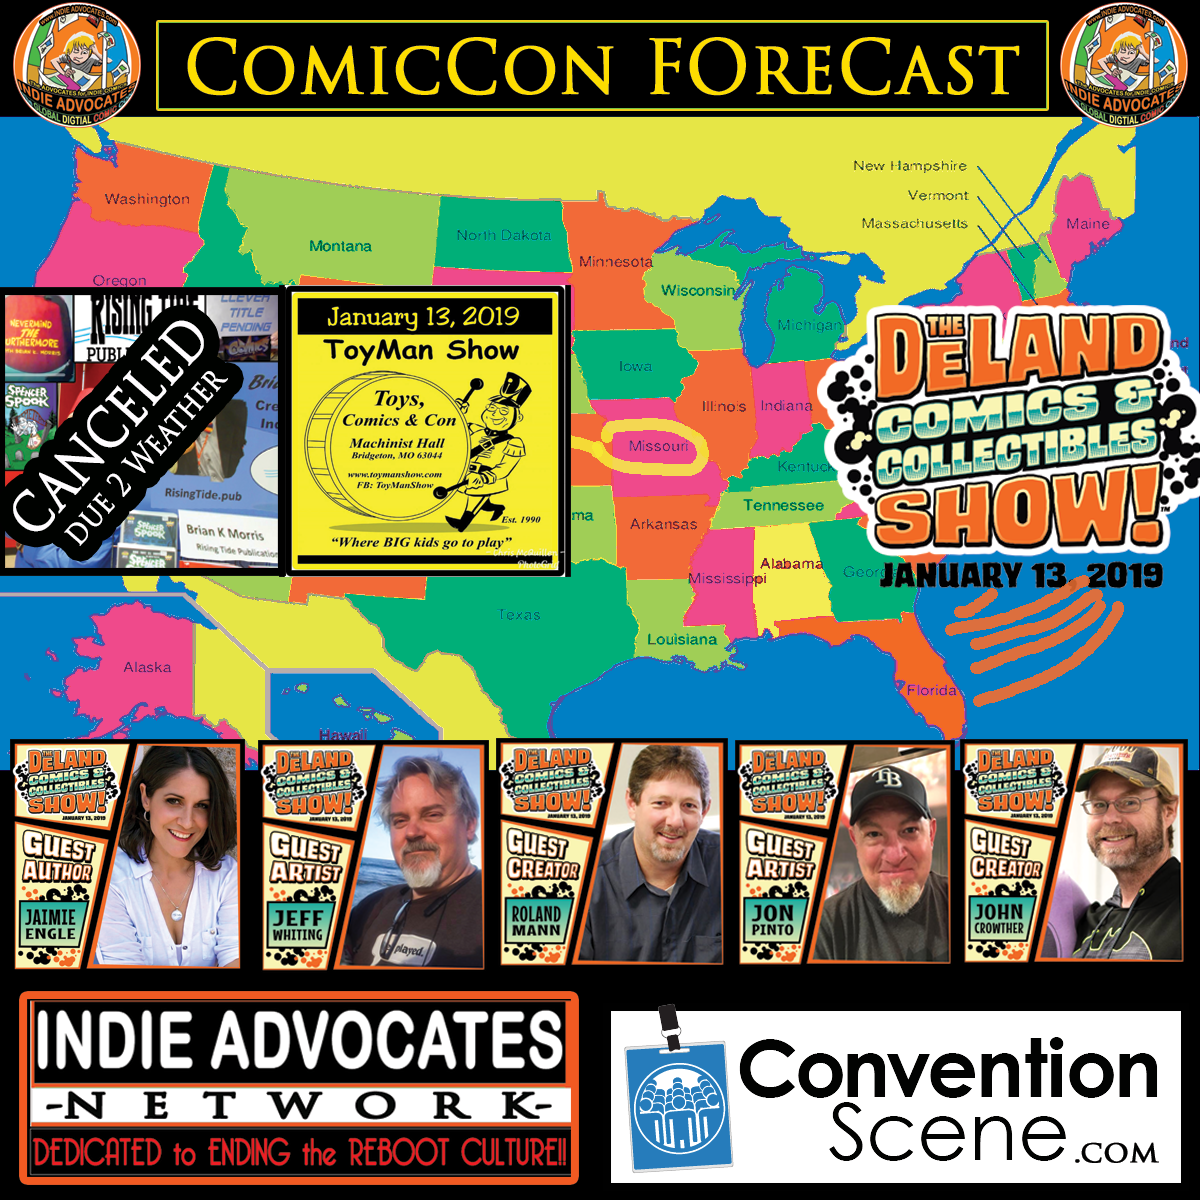 This is BREAKING INDIE NEWS & BRIAN K MORRIS and THE COMIC CON FORECAST and more